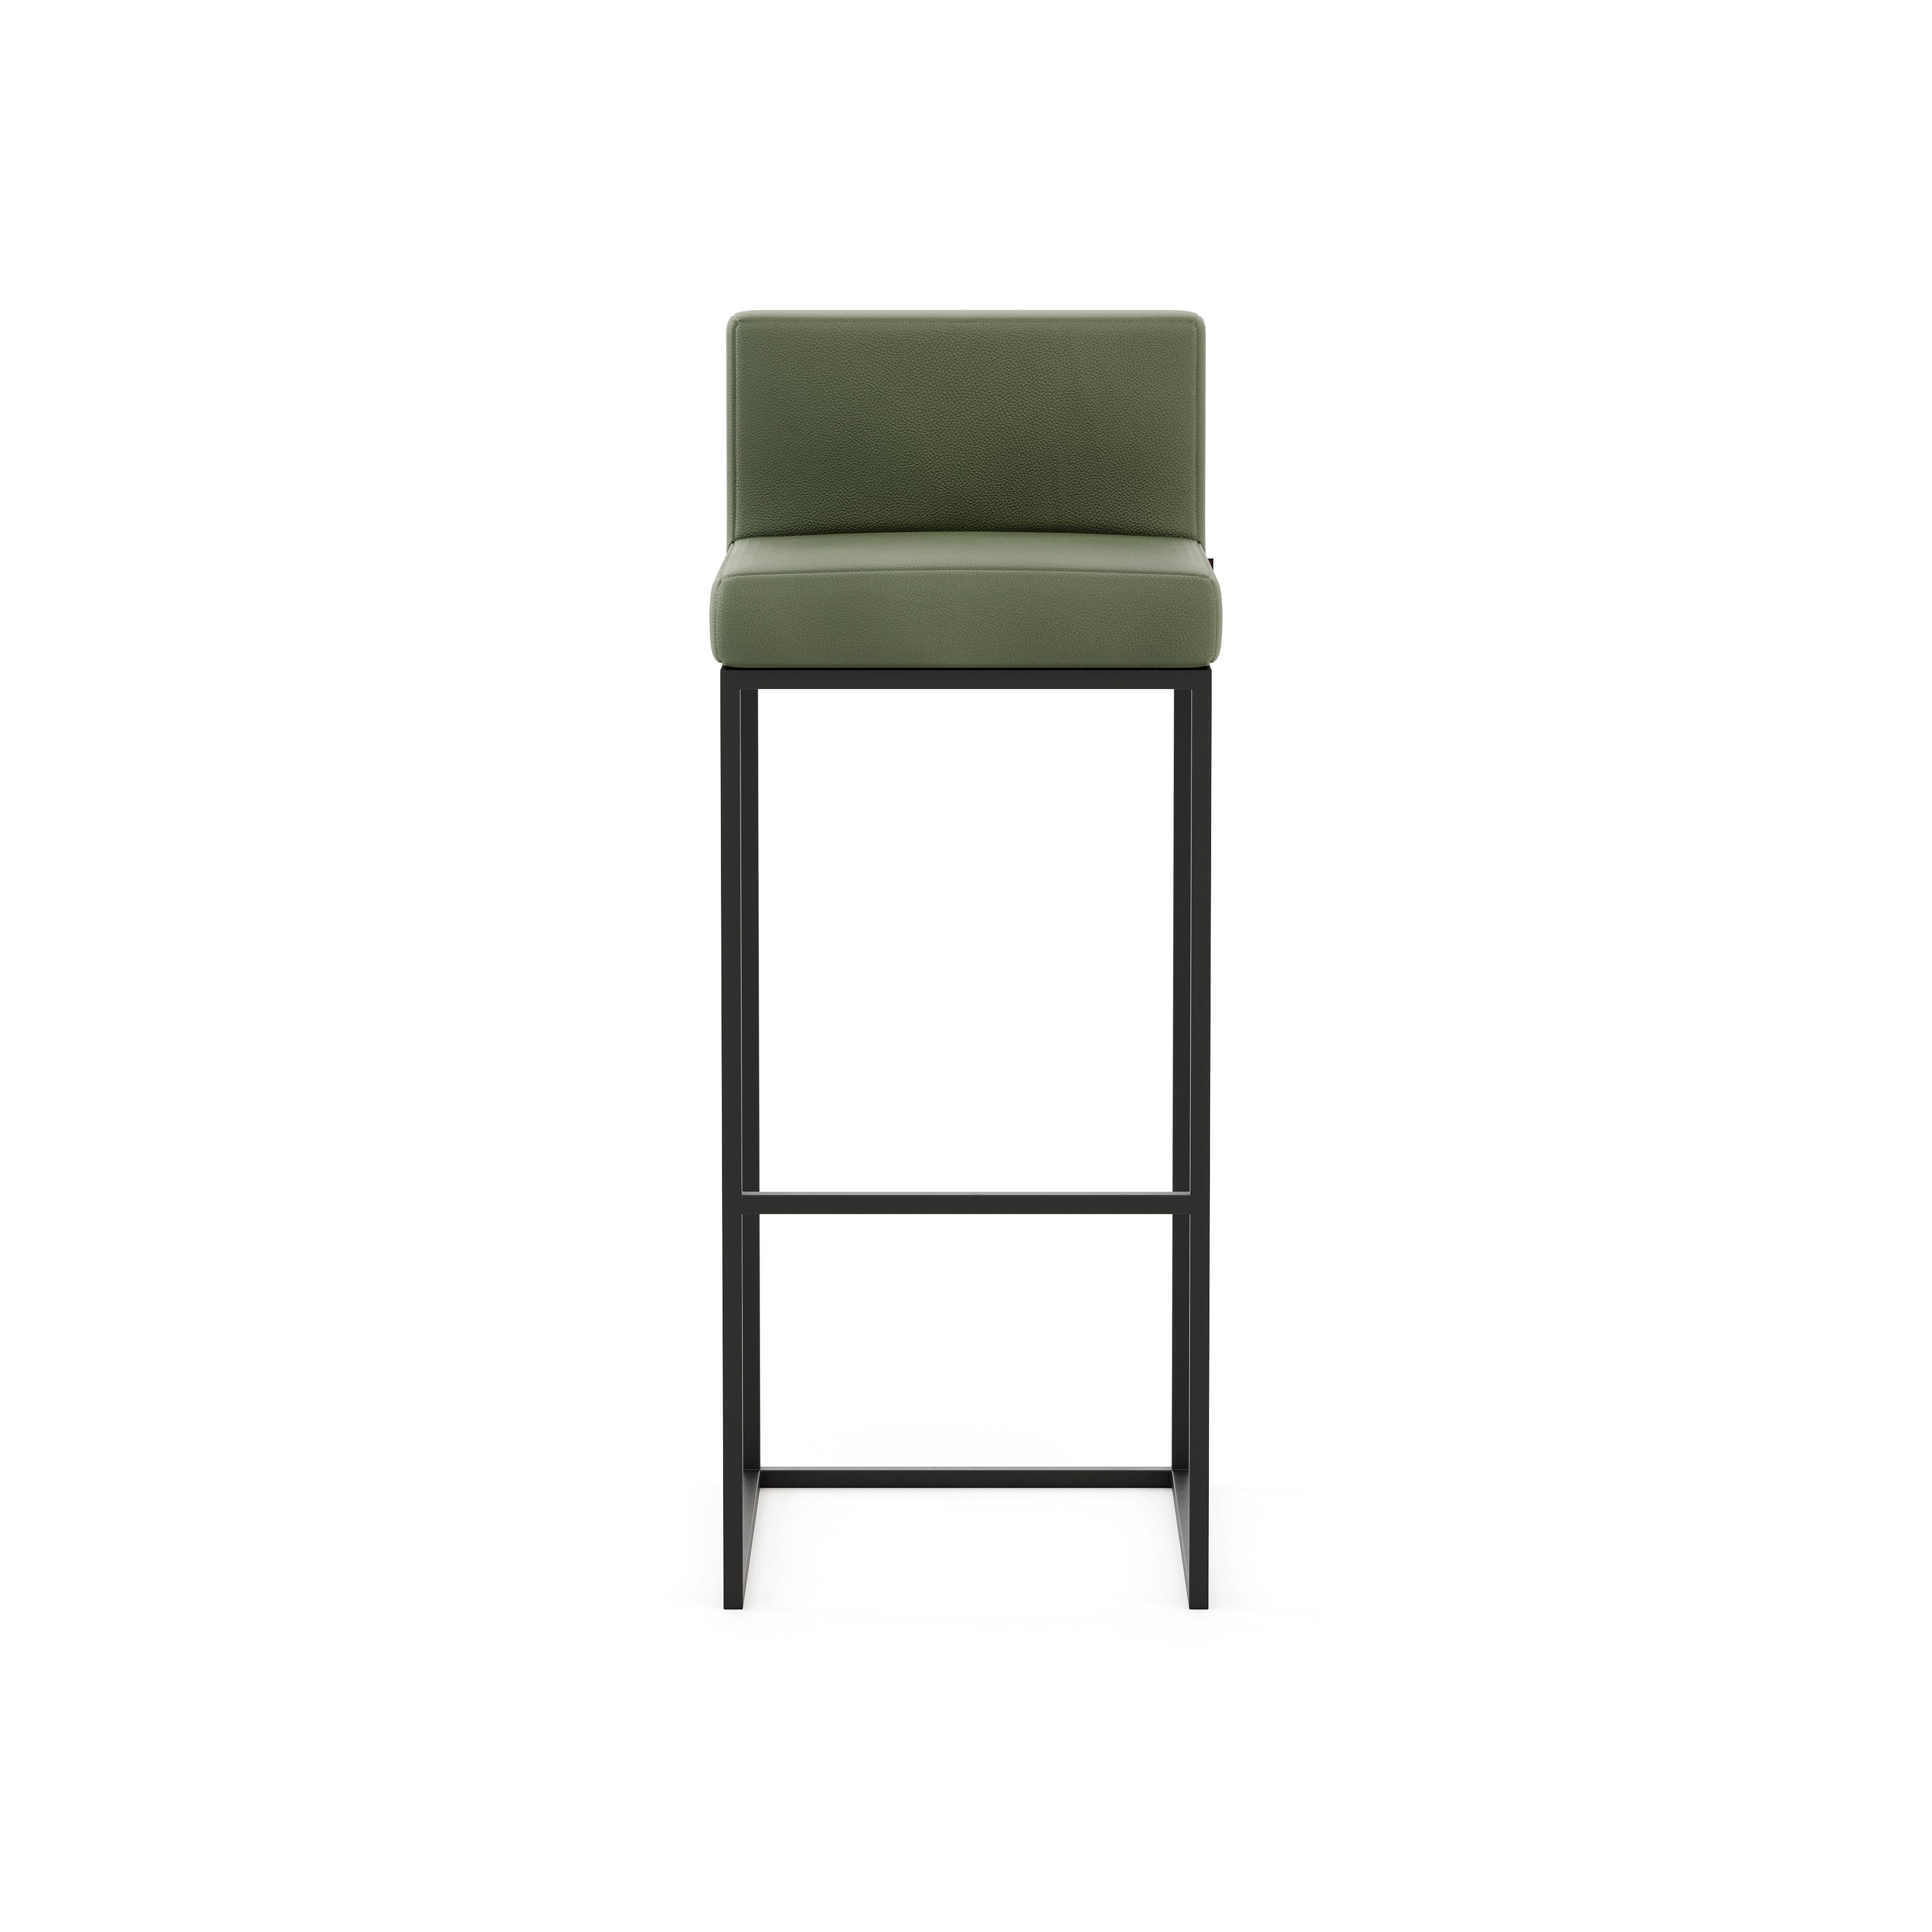 Peter bar stool is a majestic addition to any luxurious home or project. A contemporary bar chair with metallic details and structure. This is a classic design for a vintage bar or lounge residential area with a modern touch. Perfect for stylish